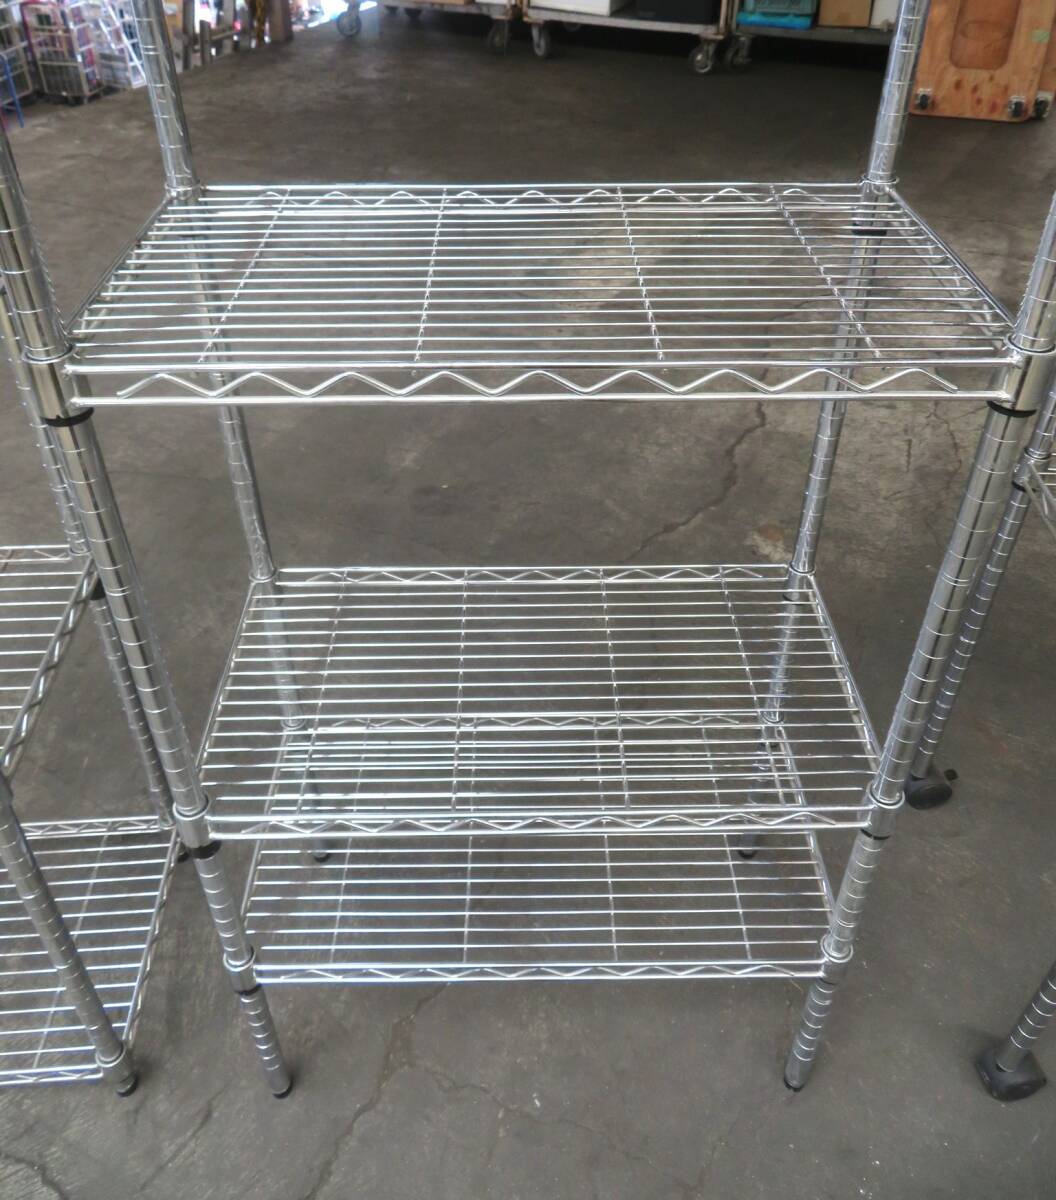 I-768) coming to a store * receipt limitation (pick up) * metal rack 3 pcs * shelves * steel rack * secondhand goods 